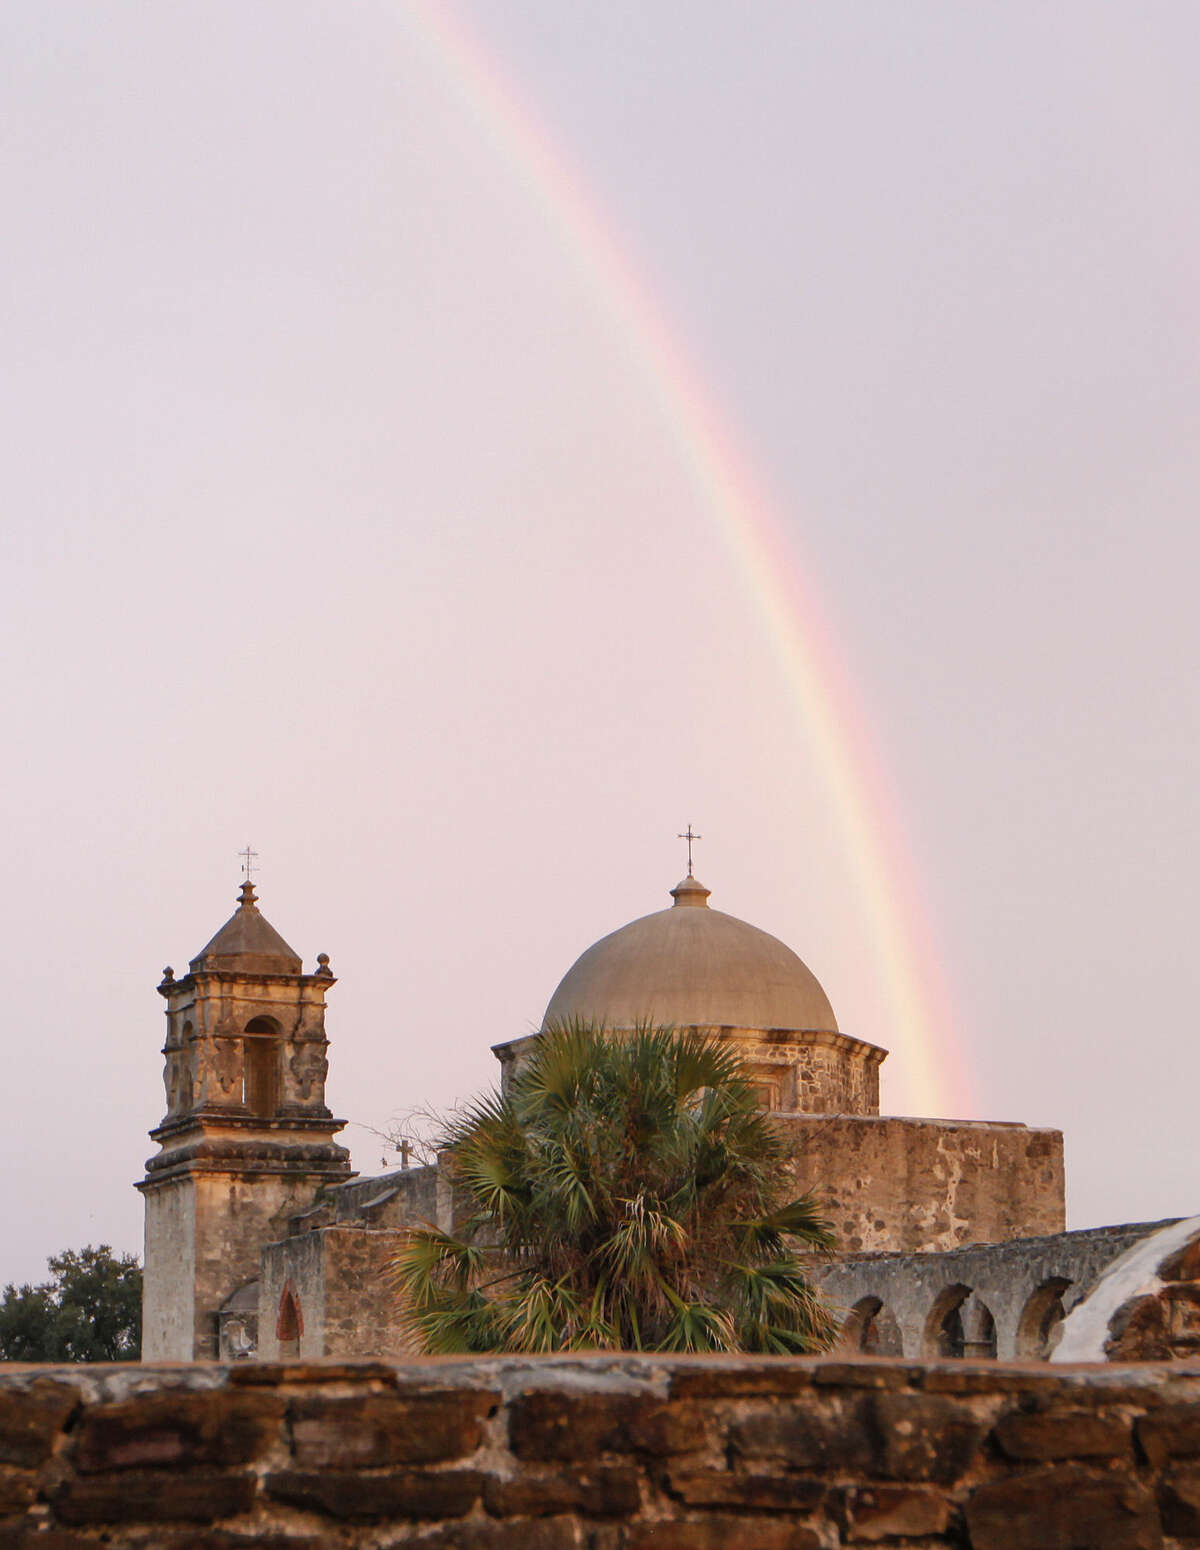 A plan from the city aims to protect the scenic integrity of San José and the three other missions that make up the San Antonio Missions National Historical Park.